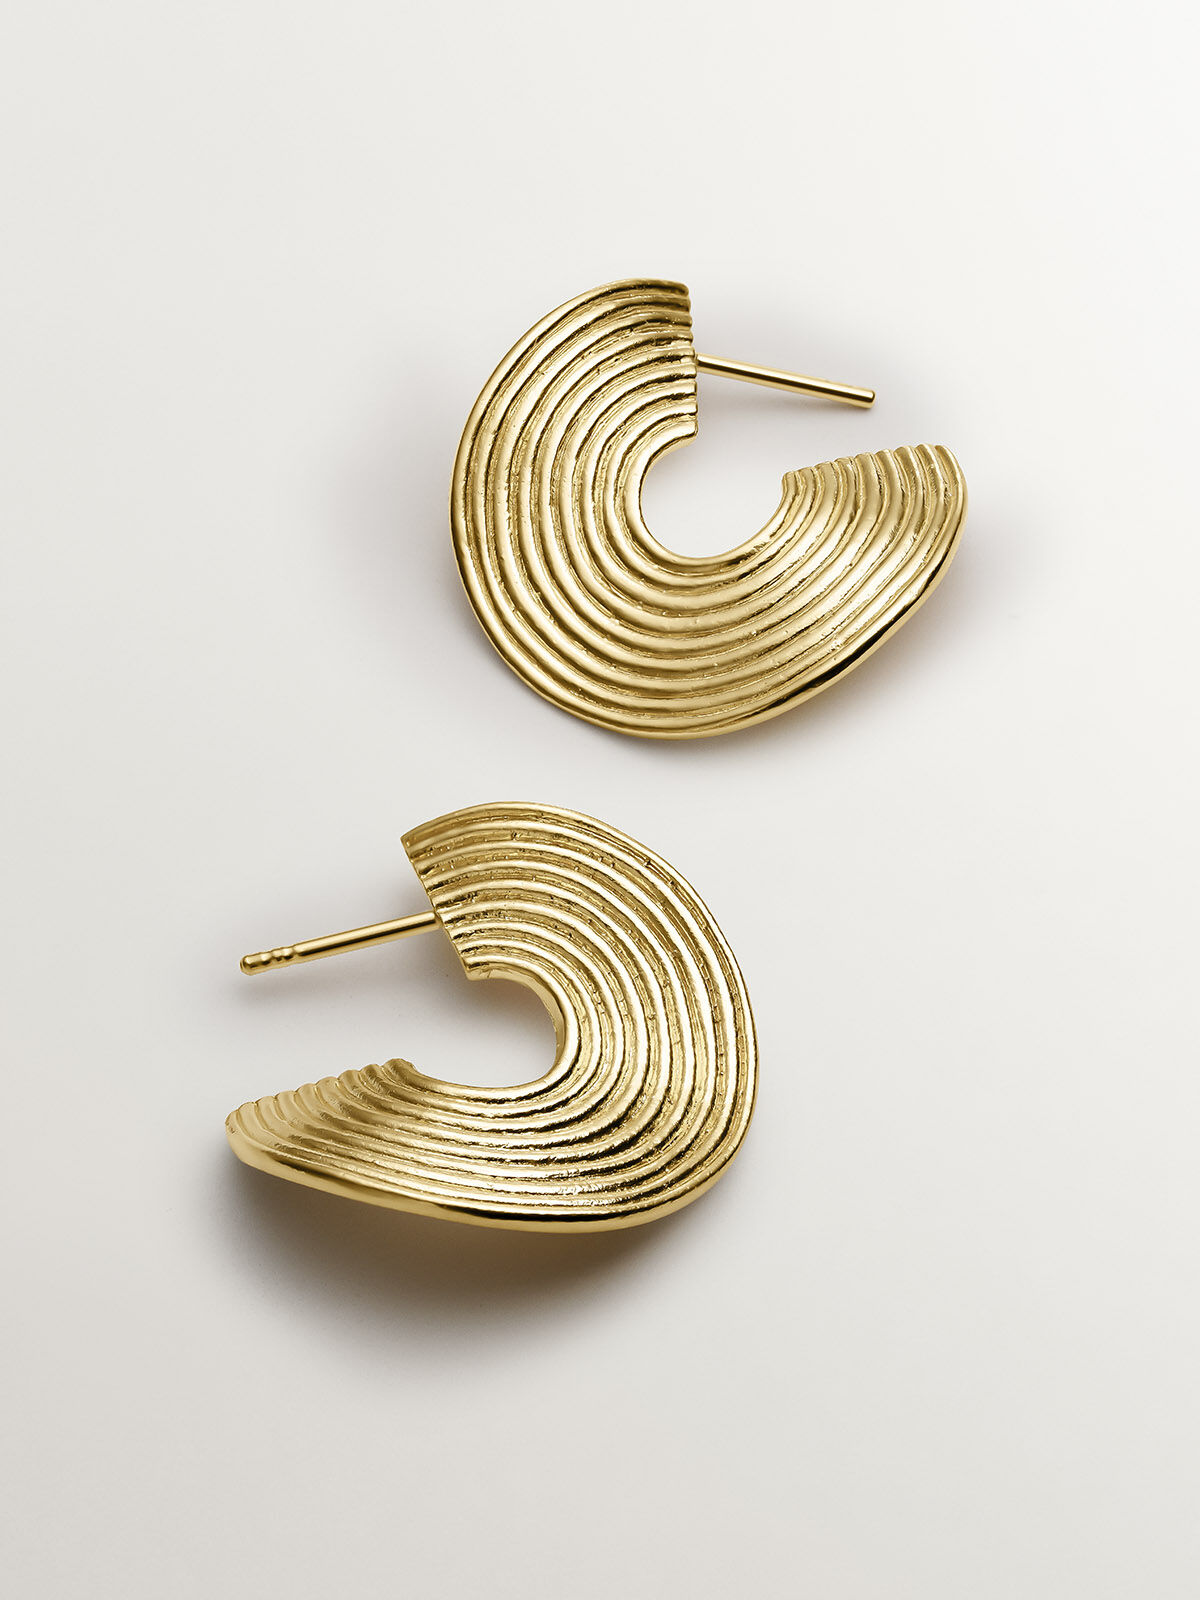 Spiral 4 Earrings by Iona Lundie SOLD - The Glasgow Gallery